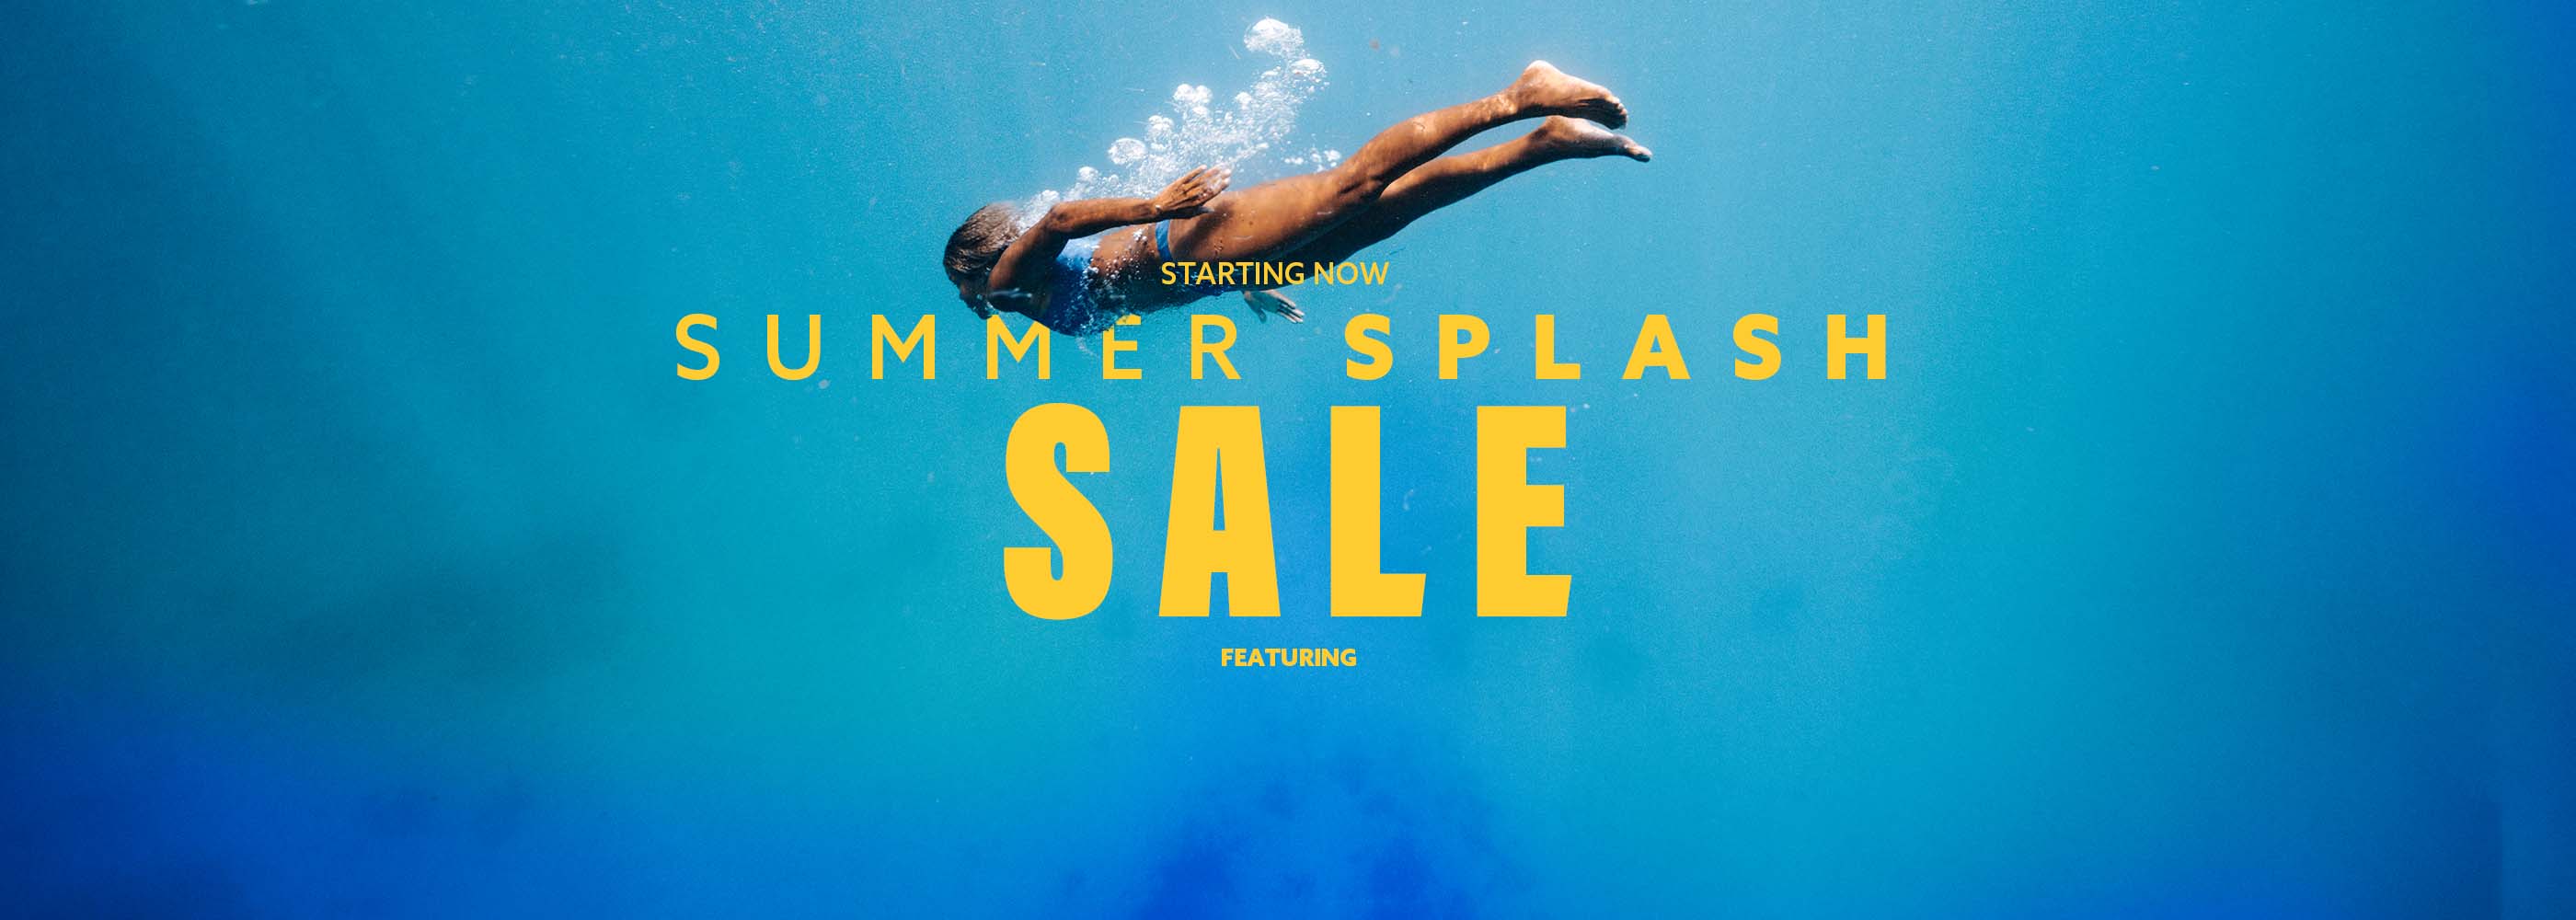 Brunotti Summer Splash Sale stared now Featuring women, men and kids collection. With Sarah-Quita Offringa diving and swimming in a Brunotti Bikini